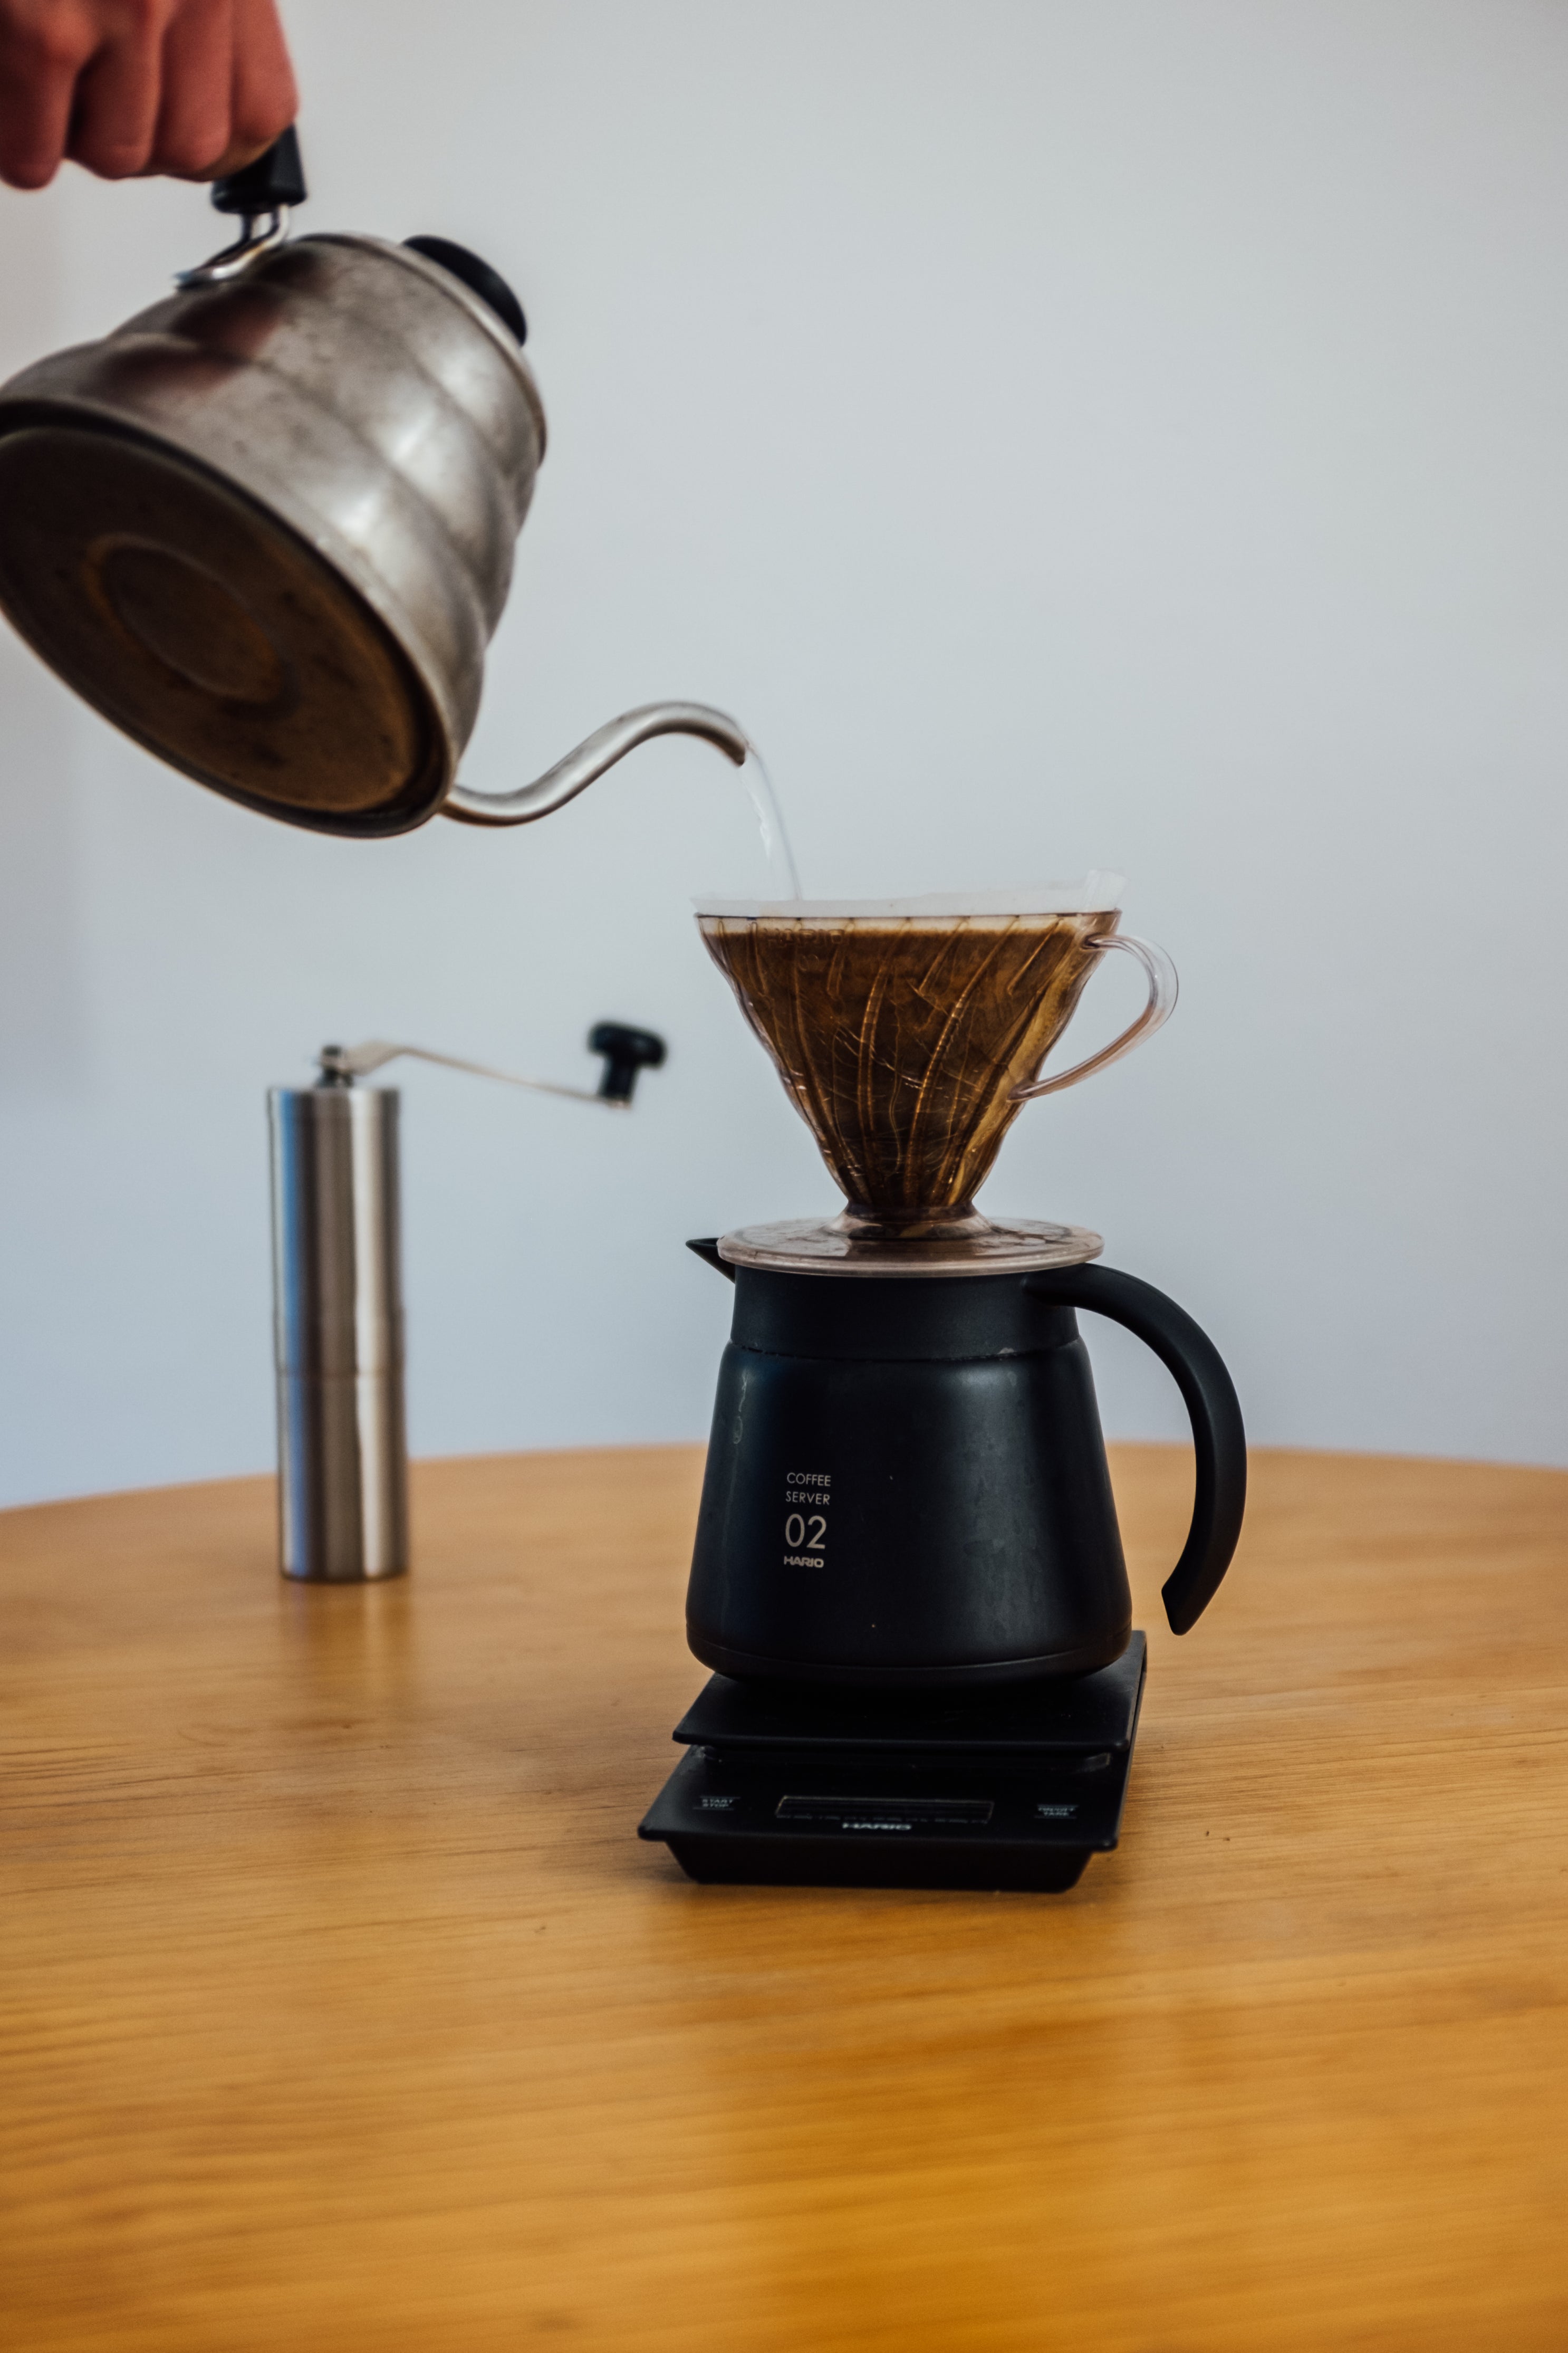 wooden table with a scale holding a coffee pot with hand pouring from above